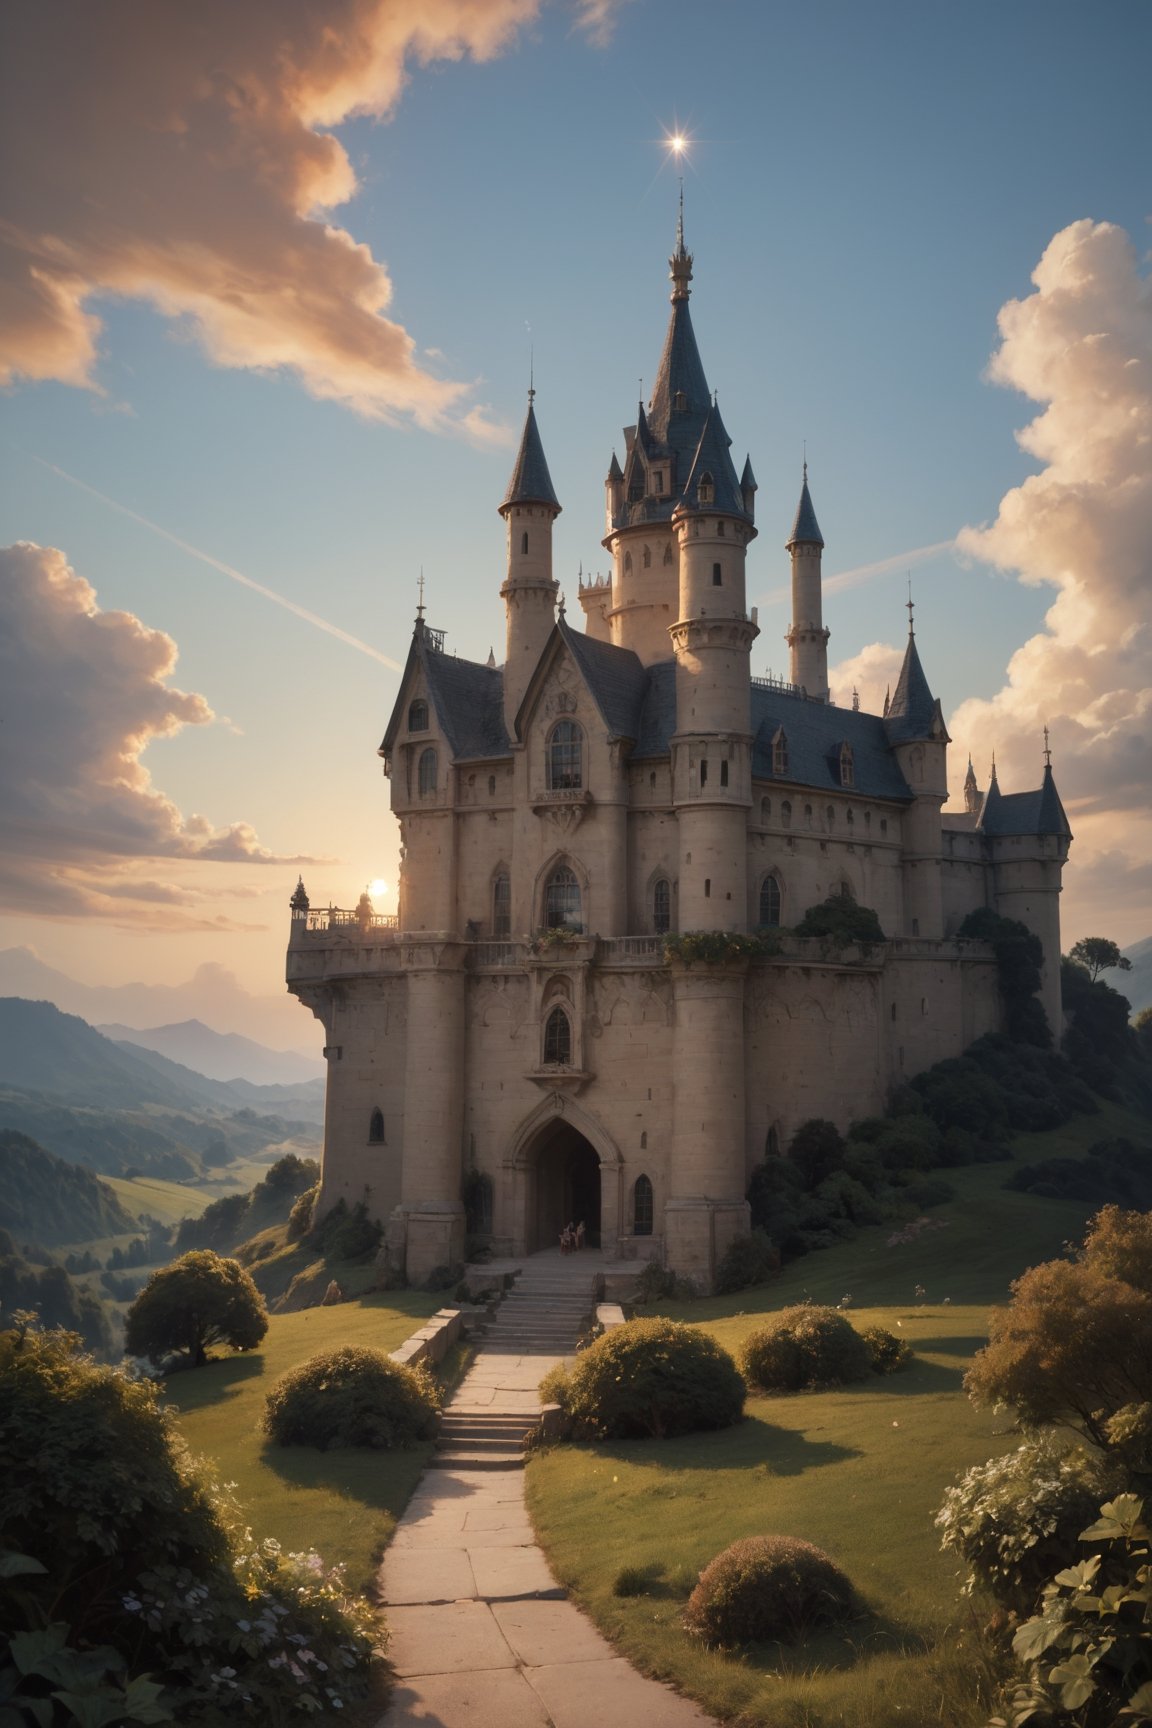 score_9_up, score_8_up, score_7_up, score_9_up, score_8_up, score_8_up, 

professional photo, masterpiece, photorealistic, hyper-detailed, realistic, ultra-high resolution, highest quality 

Generate an image showing a majestic medieval castle at sunrise. The castle should be situated on a hill, overlooking the vast valley below. Its stone walls and towers are illuminated by the first rays of the sun, giving them a golden glow. The rising sun creates a warm, orange-pink glow in the sky, with delicate clouds reflecting these colors. 

There are dense forests around the castle, and in the valley you can see the river flowing along the castle walls. In the castle courtyard, you can see knights and horses preparing for the day, as well as flags flying from the towers. The entire scene should exude calm and majestic beauty, emphasizing the historic and epic nature of the place.